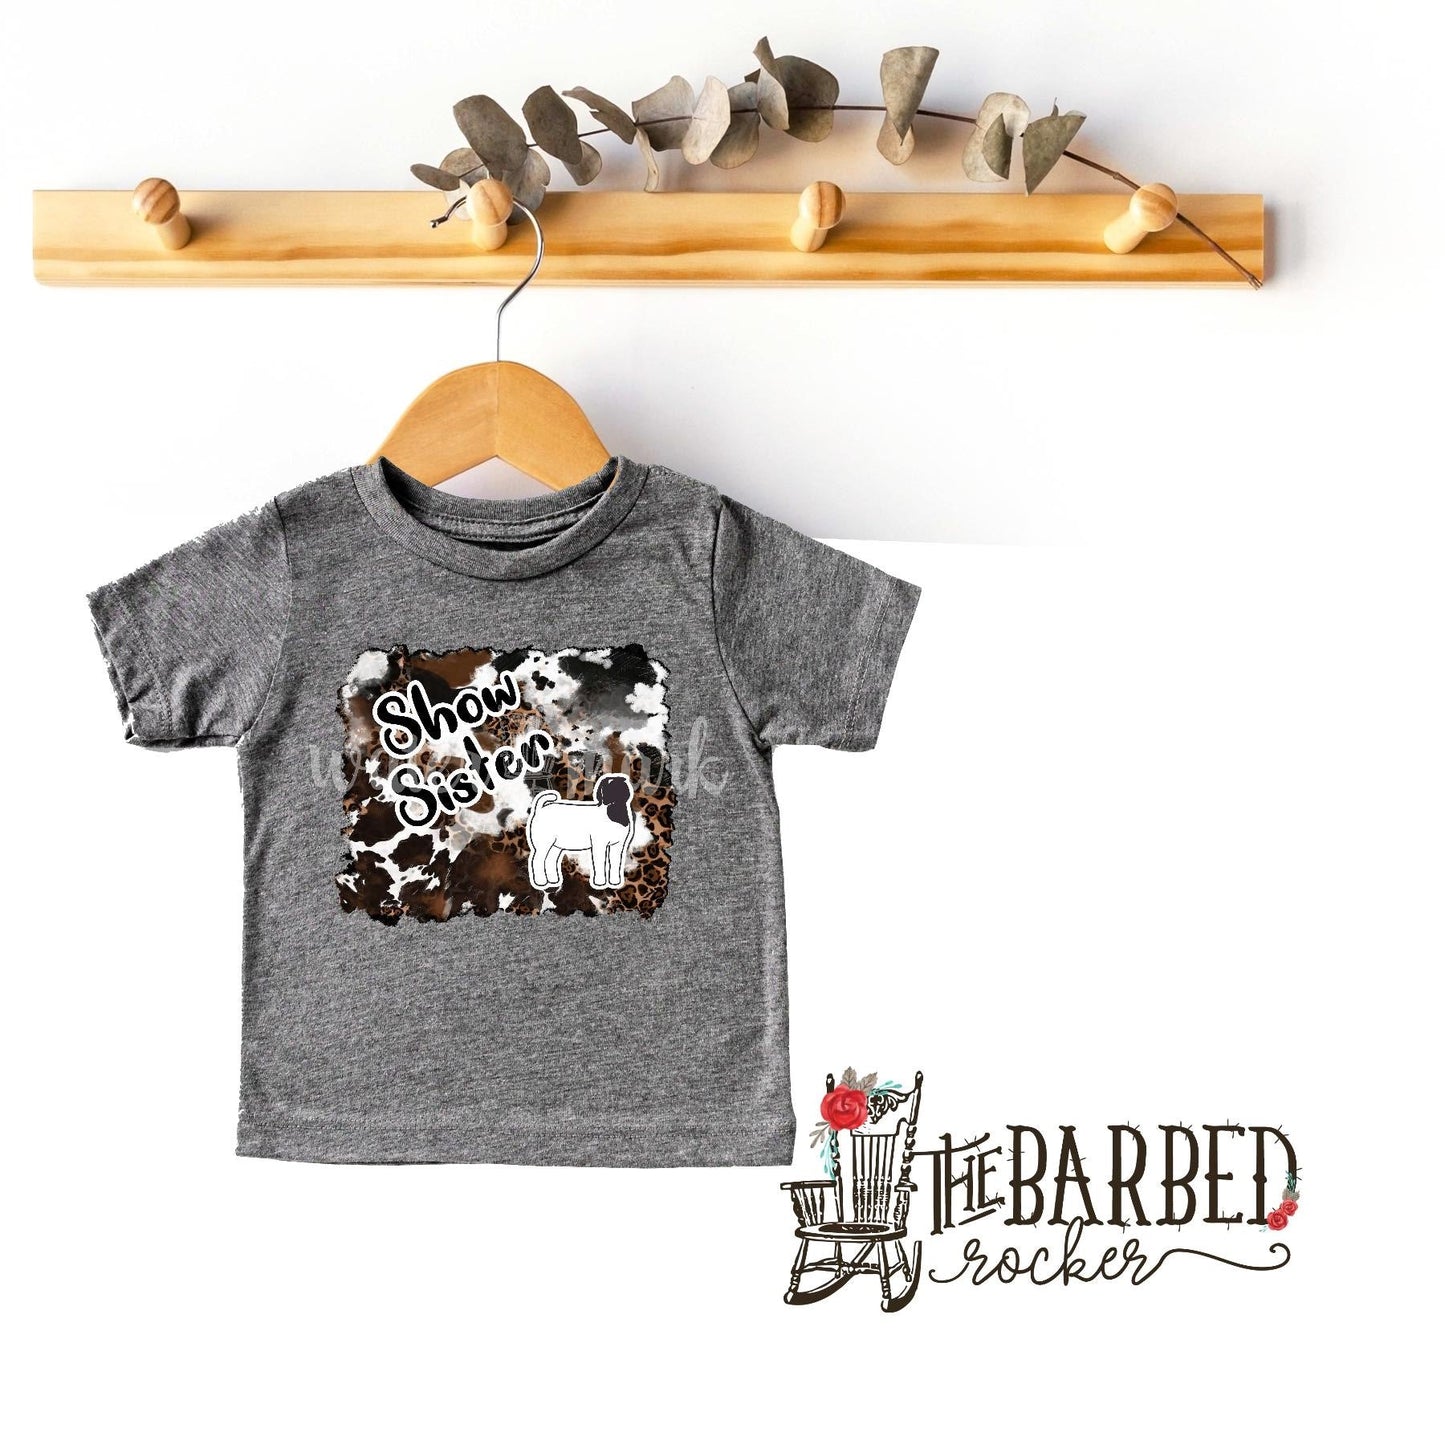 Infant Cowhide "Show Sister Show Sis"  Stockshow T-Shirt Show Girl